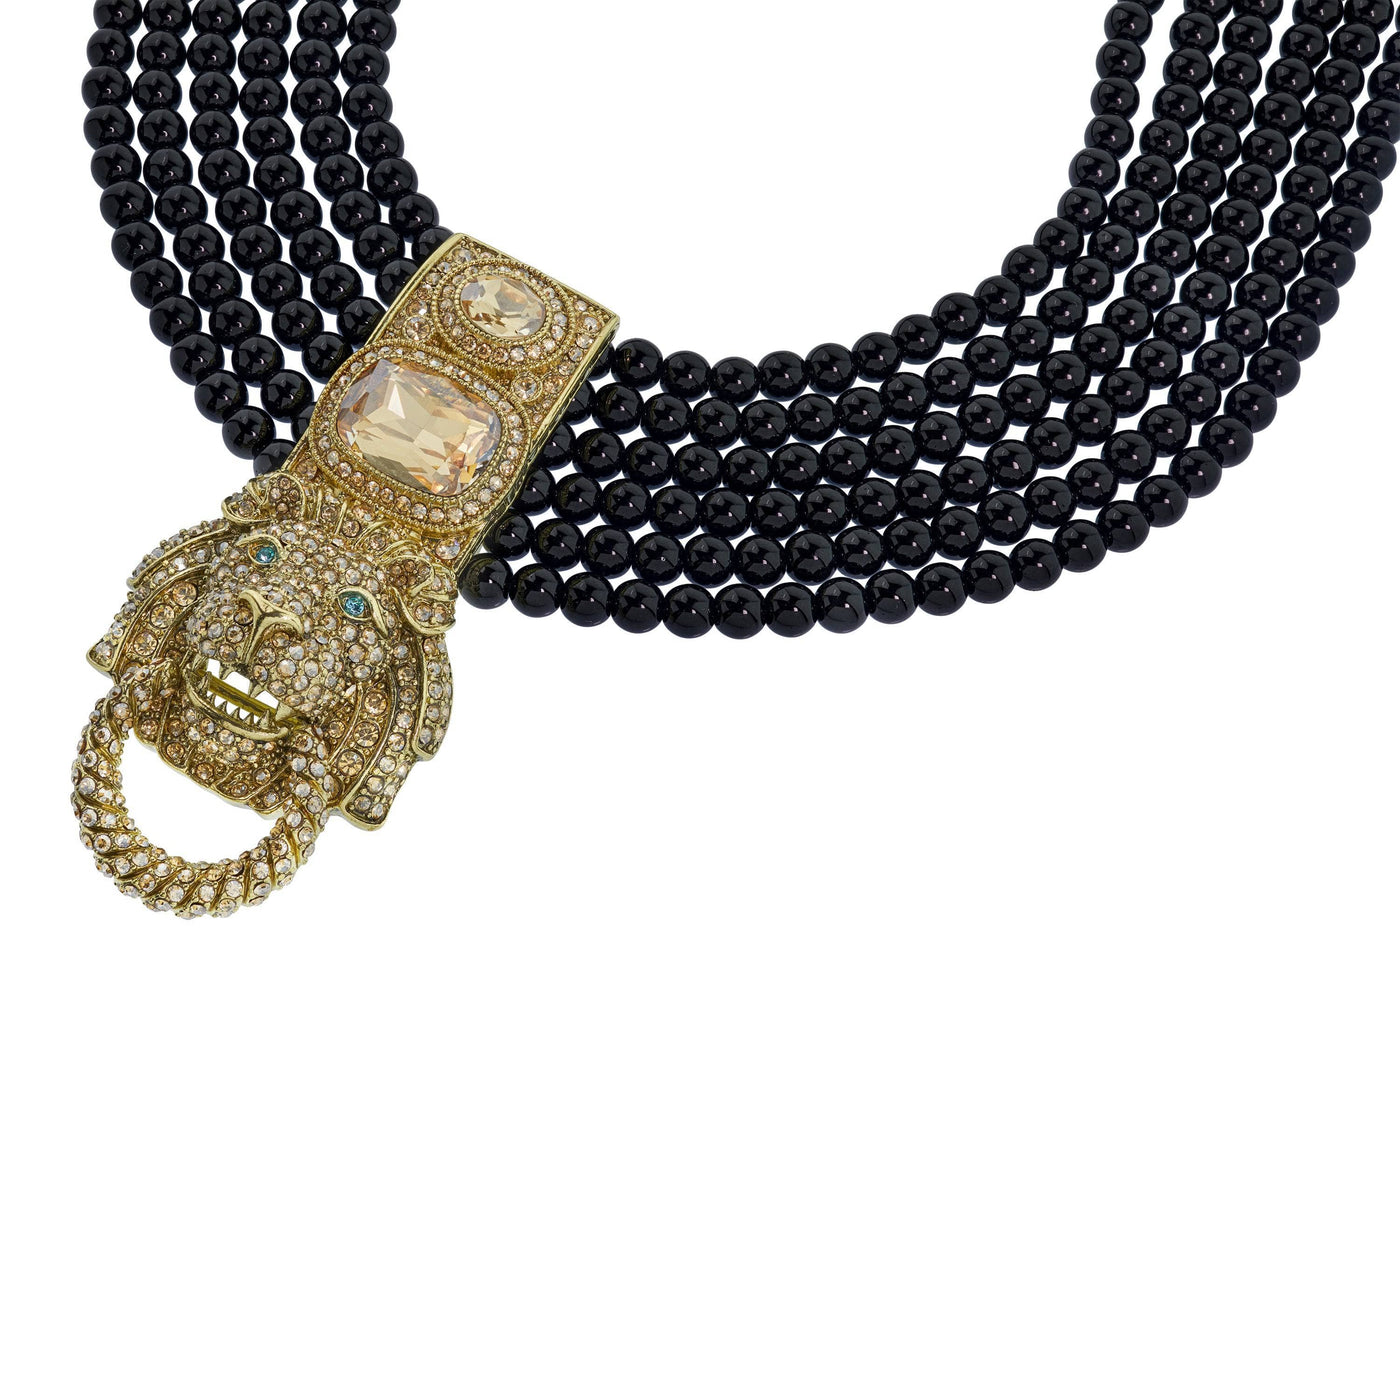 Heidi Daus® "Pride Of The Jungle" Beaded Crystal Lion Necklace